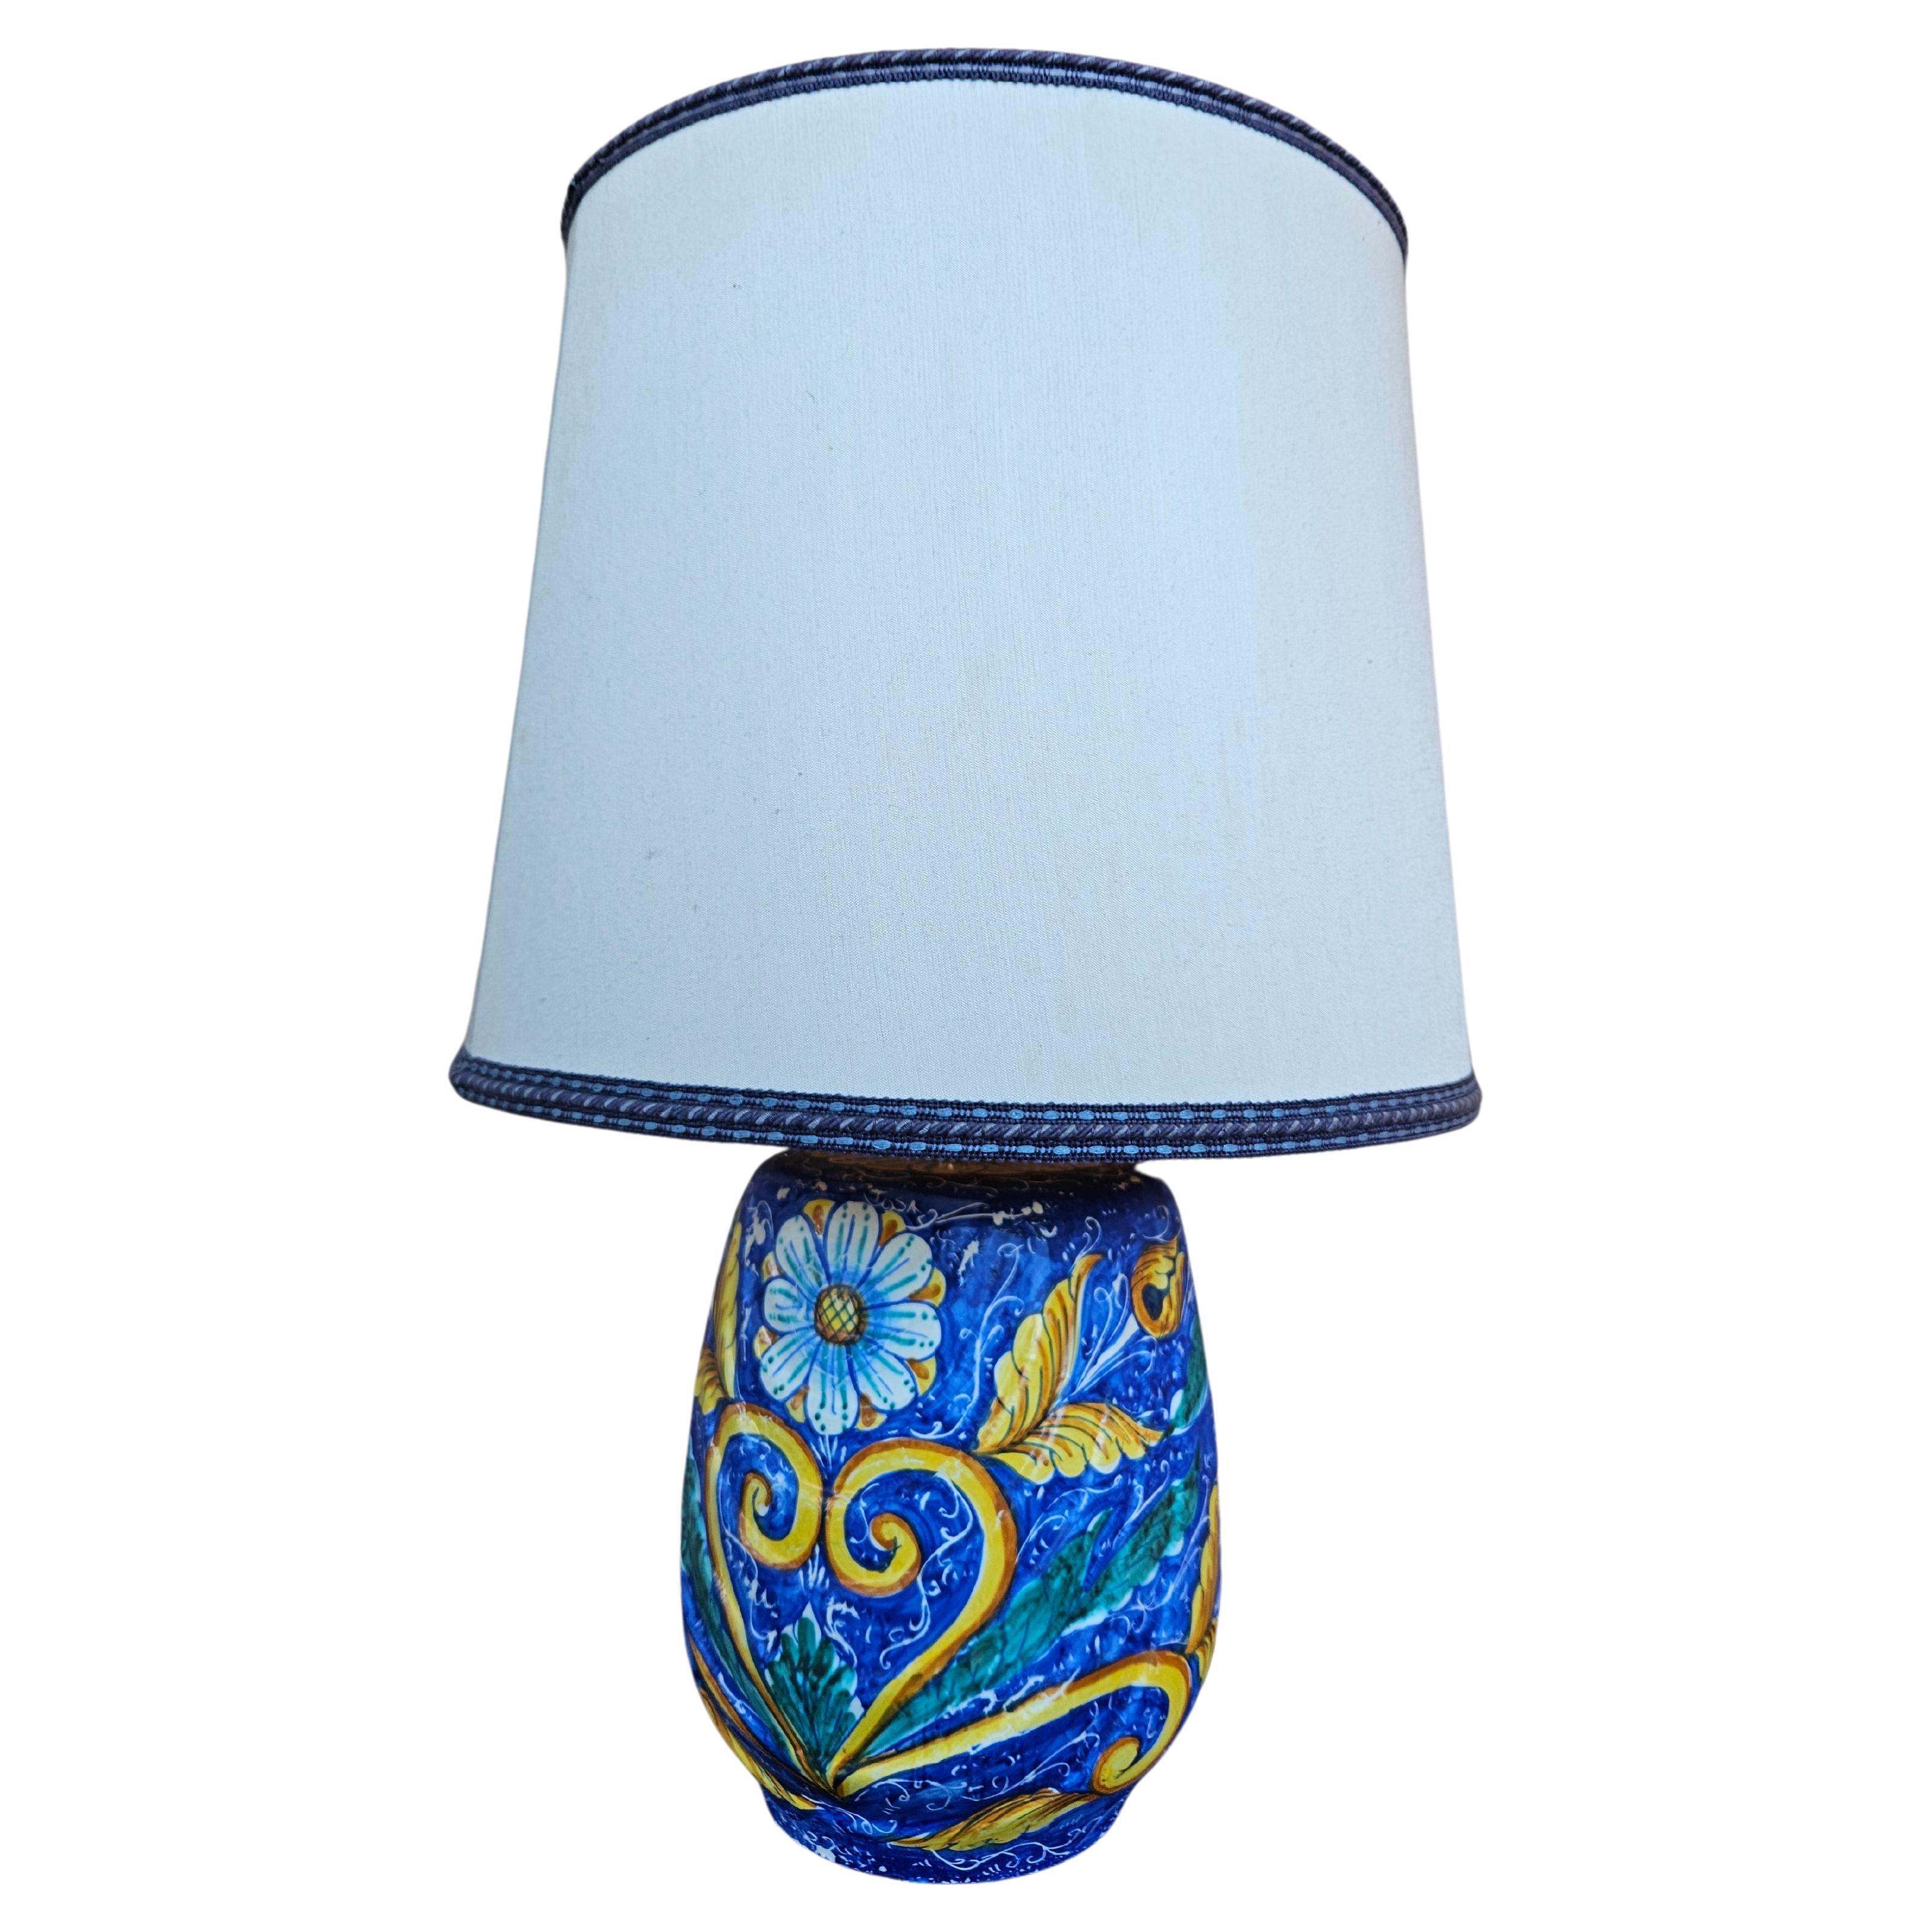 Painted ceramic table lamp with fabric shade For Sale